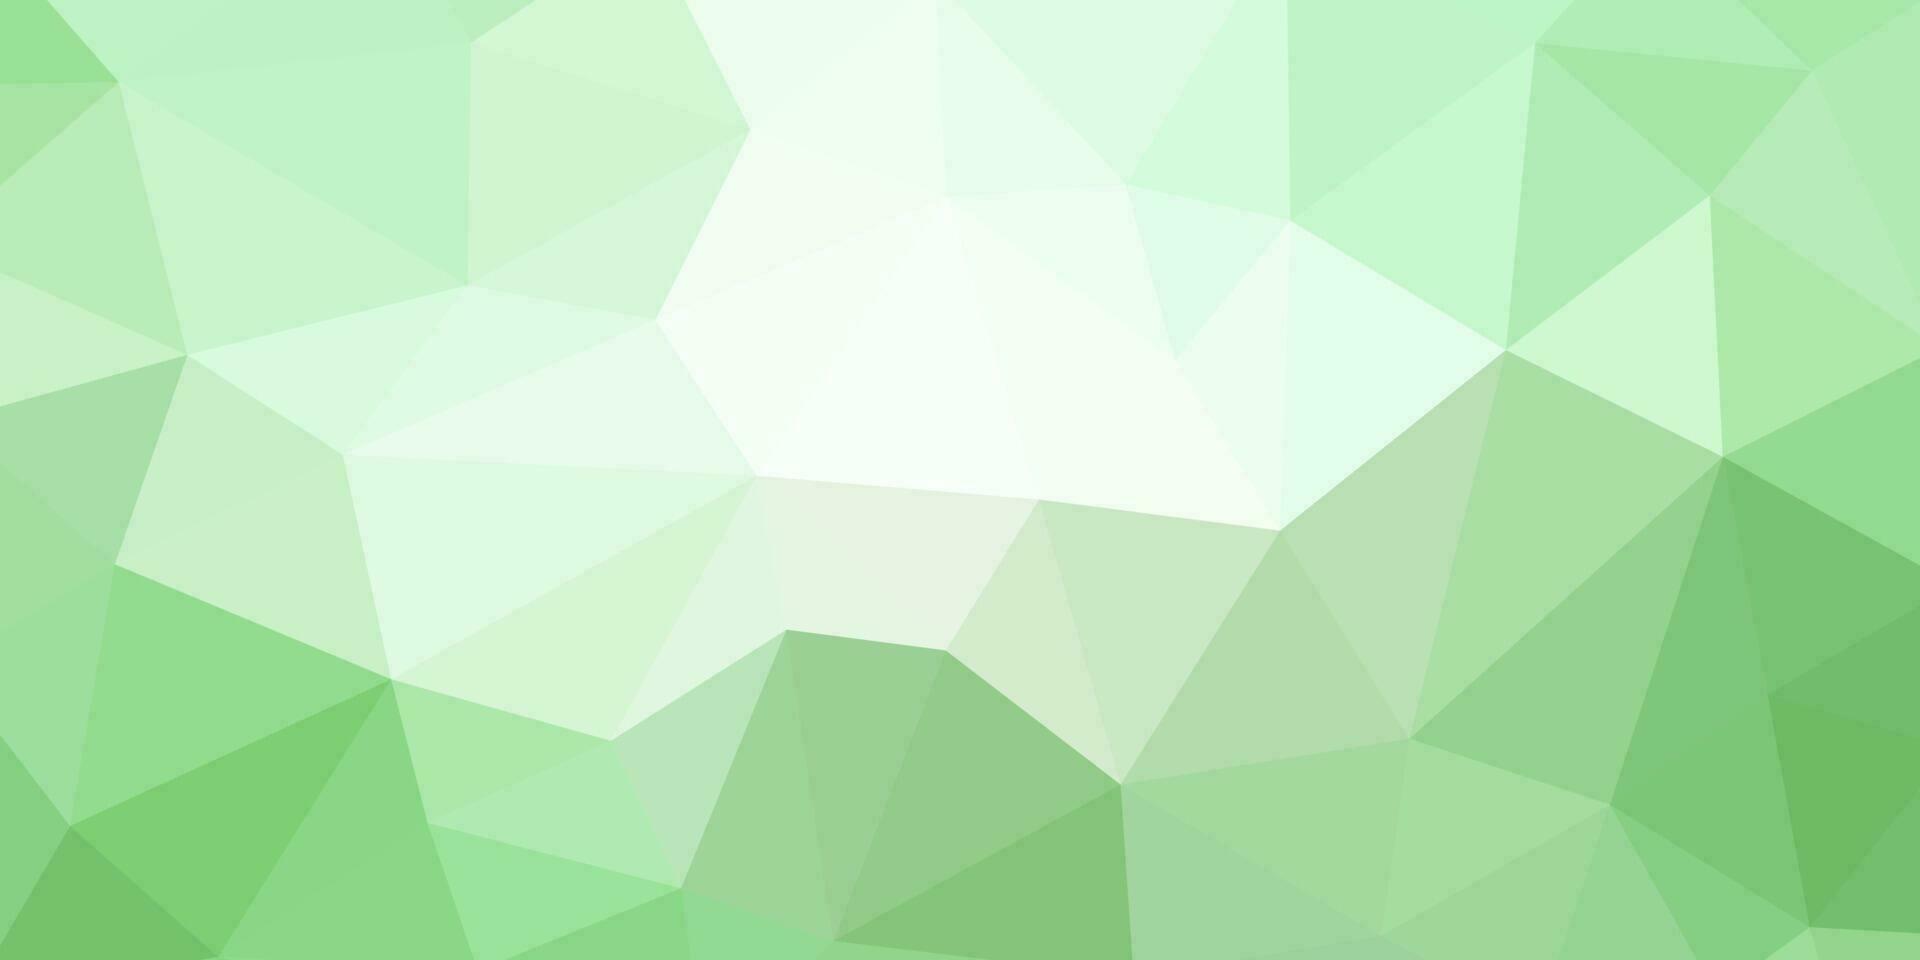 abstract geometric green gradient with triangles pattern modern background for business vector